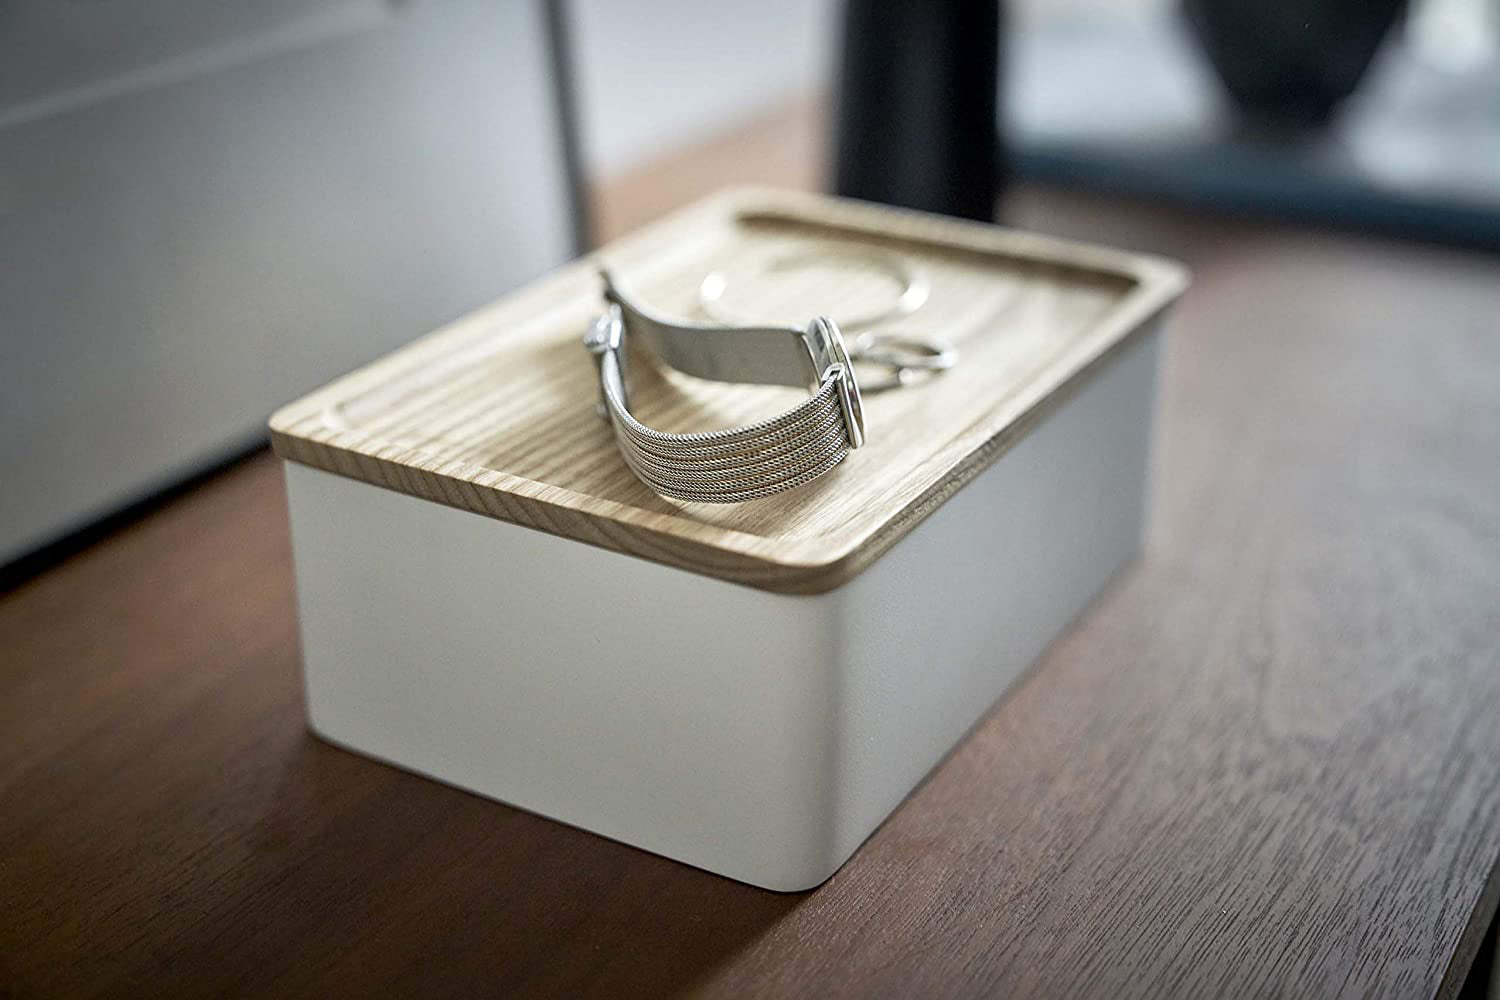 View 7 - Side view of white Accessory Box with Wood Lid holding watch and jewelry by Yamazaki Home.